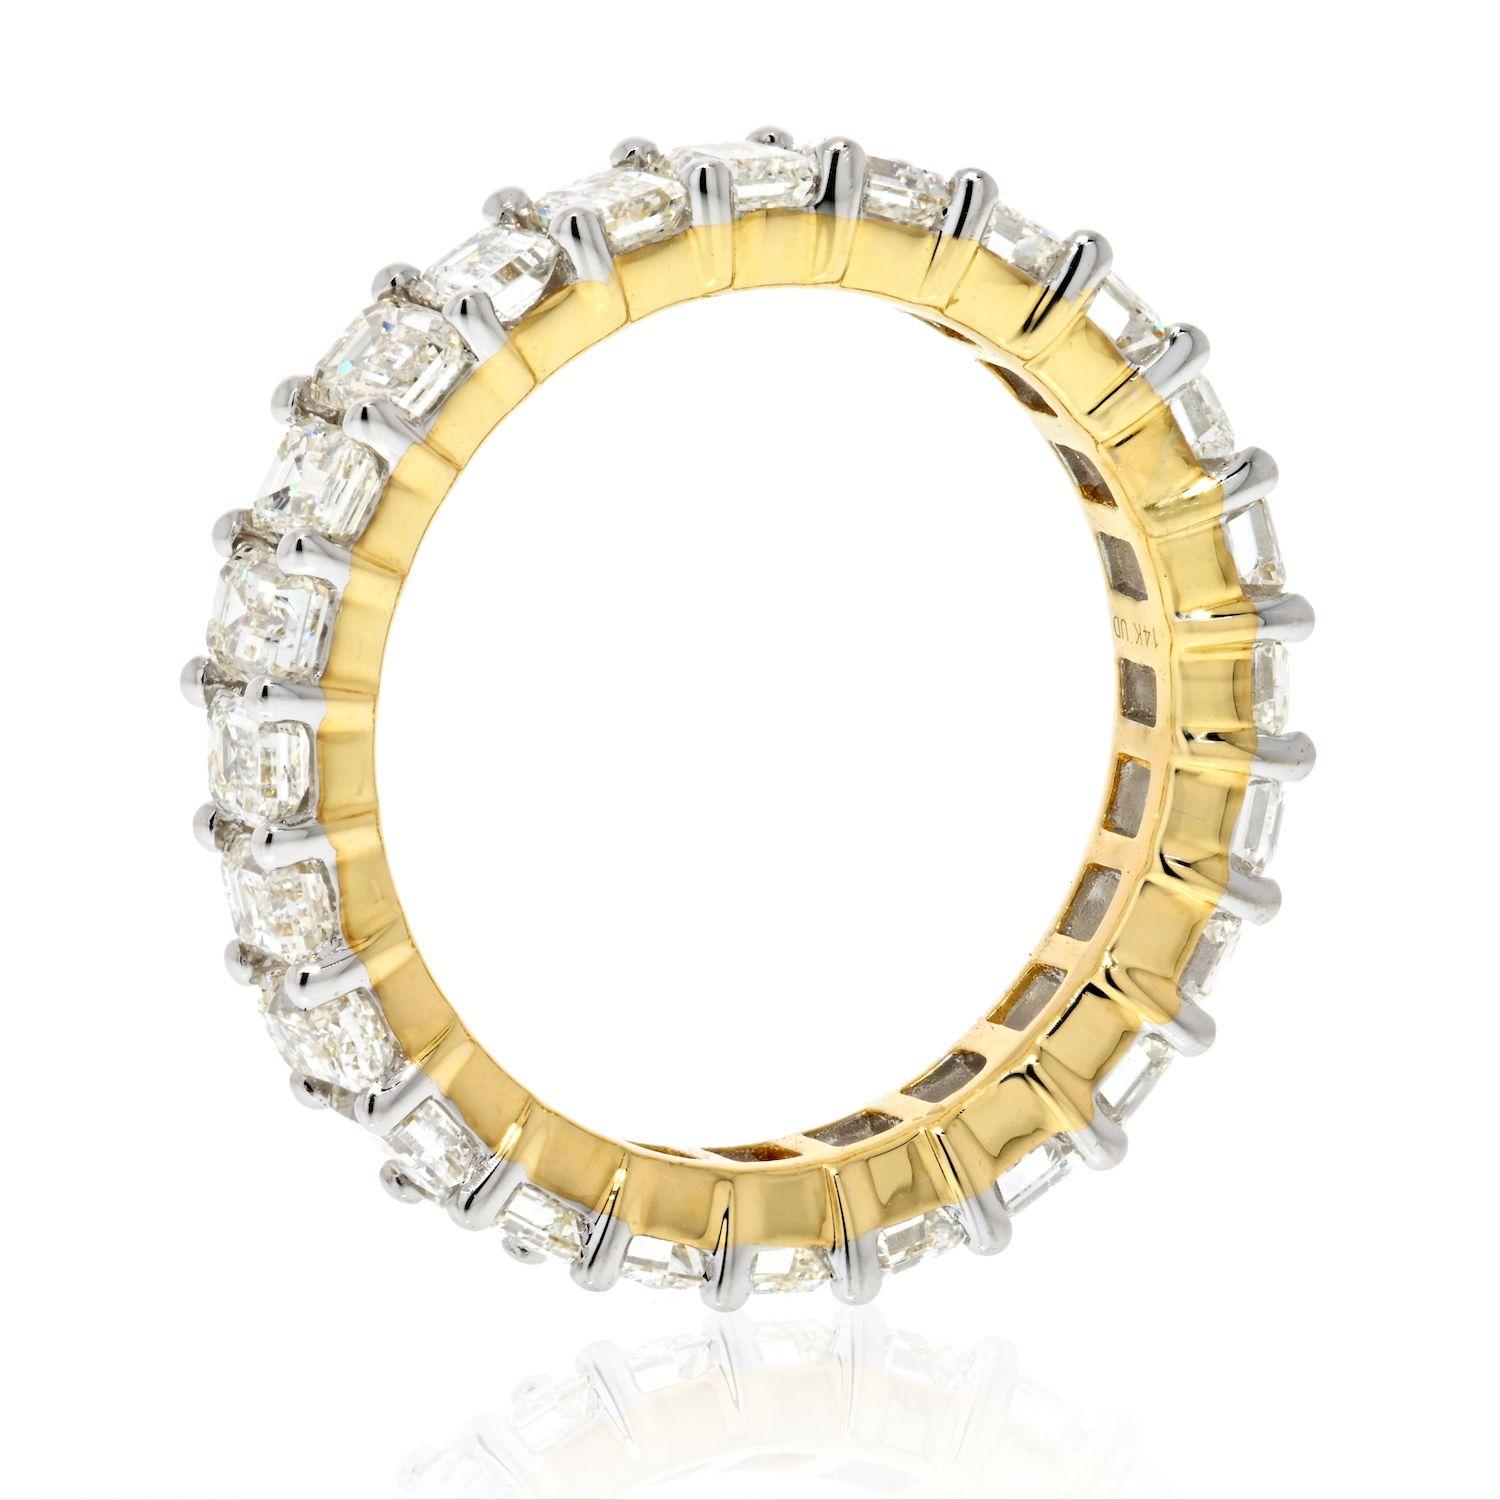 Perfect eternity band with emerald cut diamonds made in 14k yellow gold with white prongs. 
There are 24 diamnds totaling in 4.25cts. Shared prong low set mounting.
G-H color, VS-SI clarity. 
Size 7. 